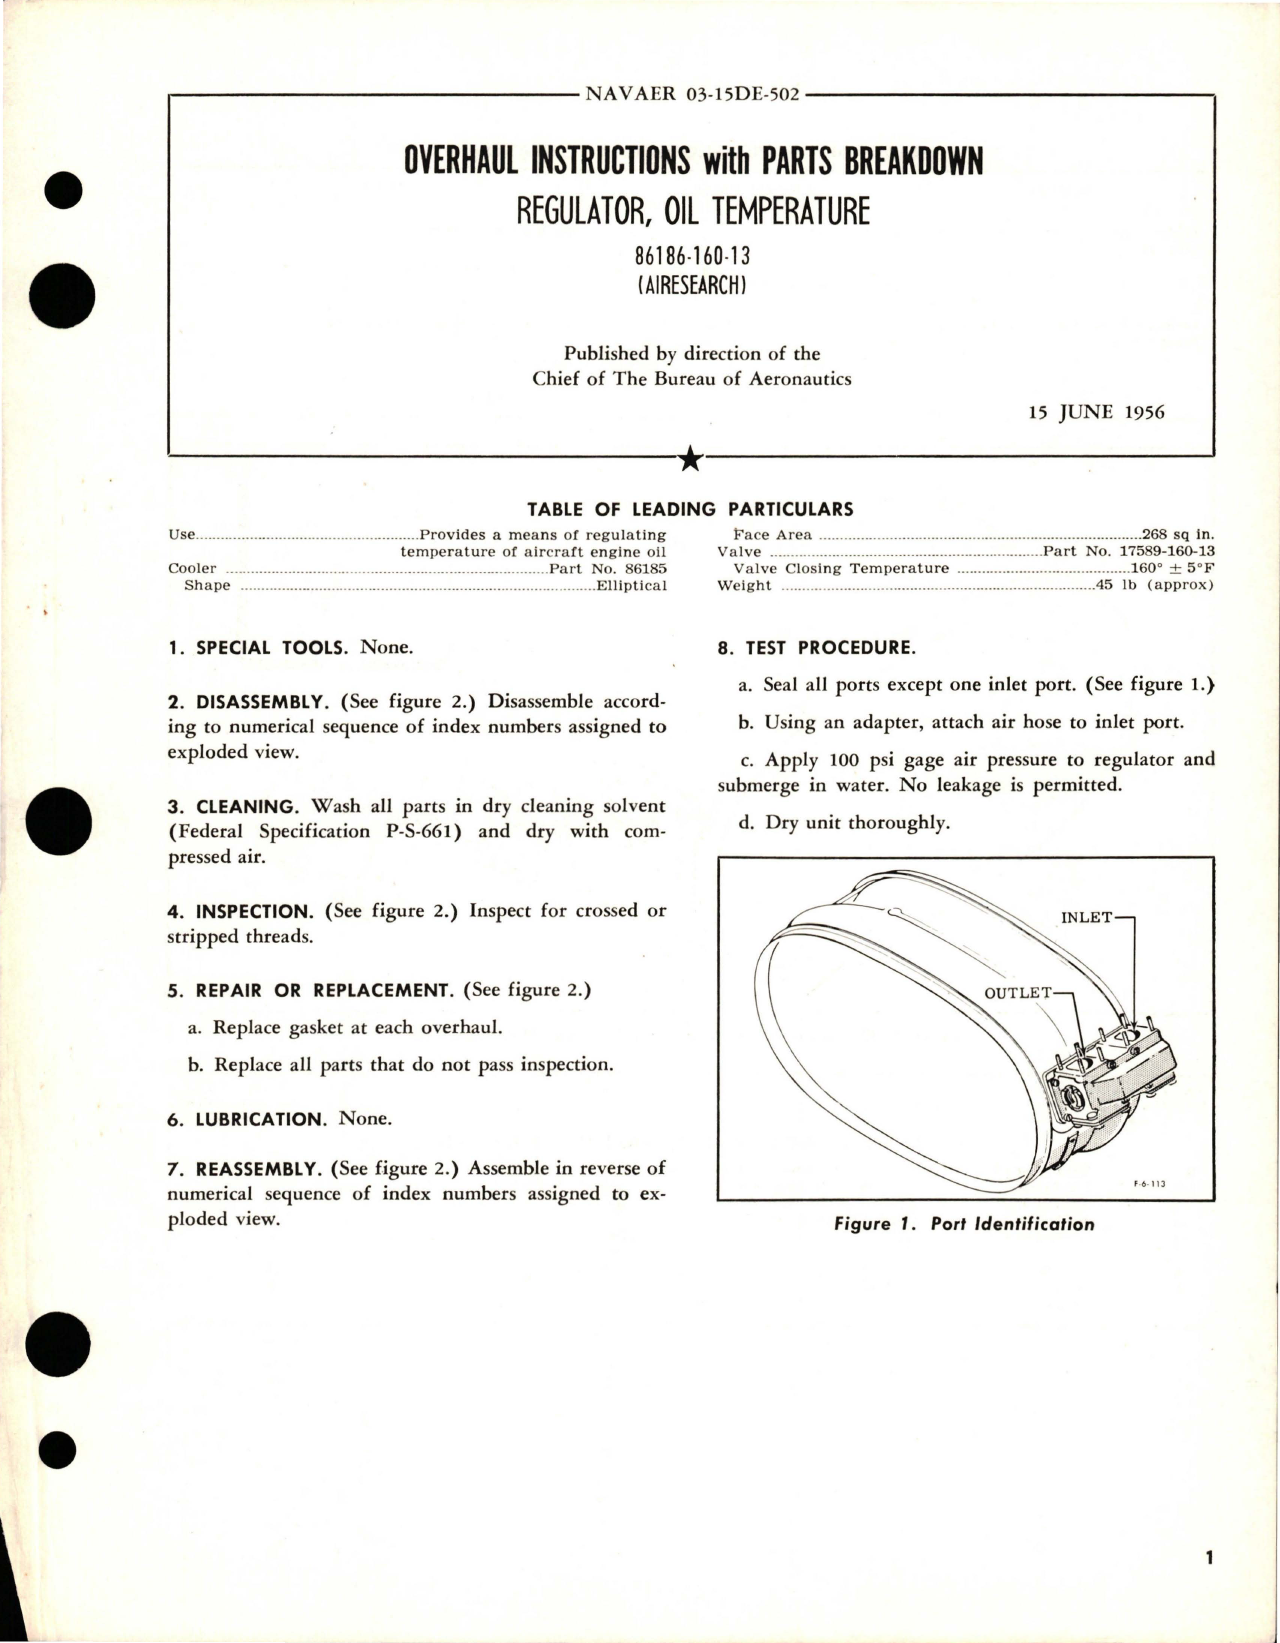 Sample page 1 from AirCorps Library document: Overhaul Instructions with Parts Breakdown for Oil Temperature Regulator - 86186-160-13